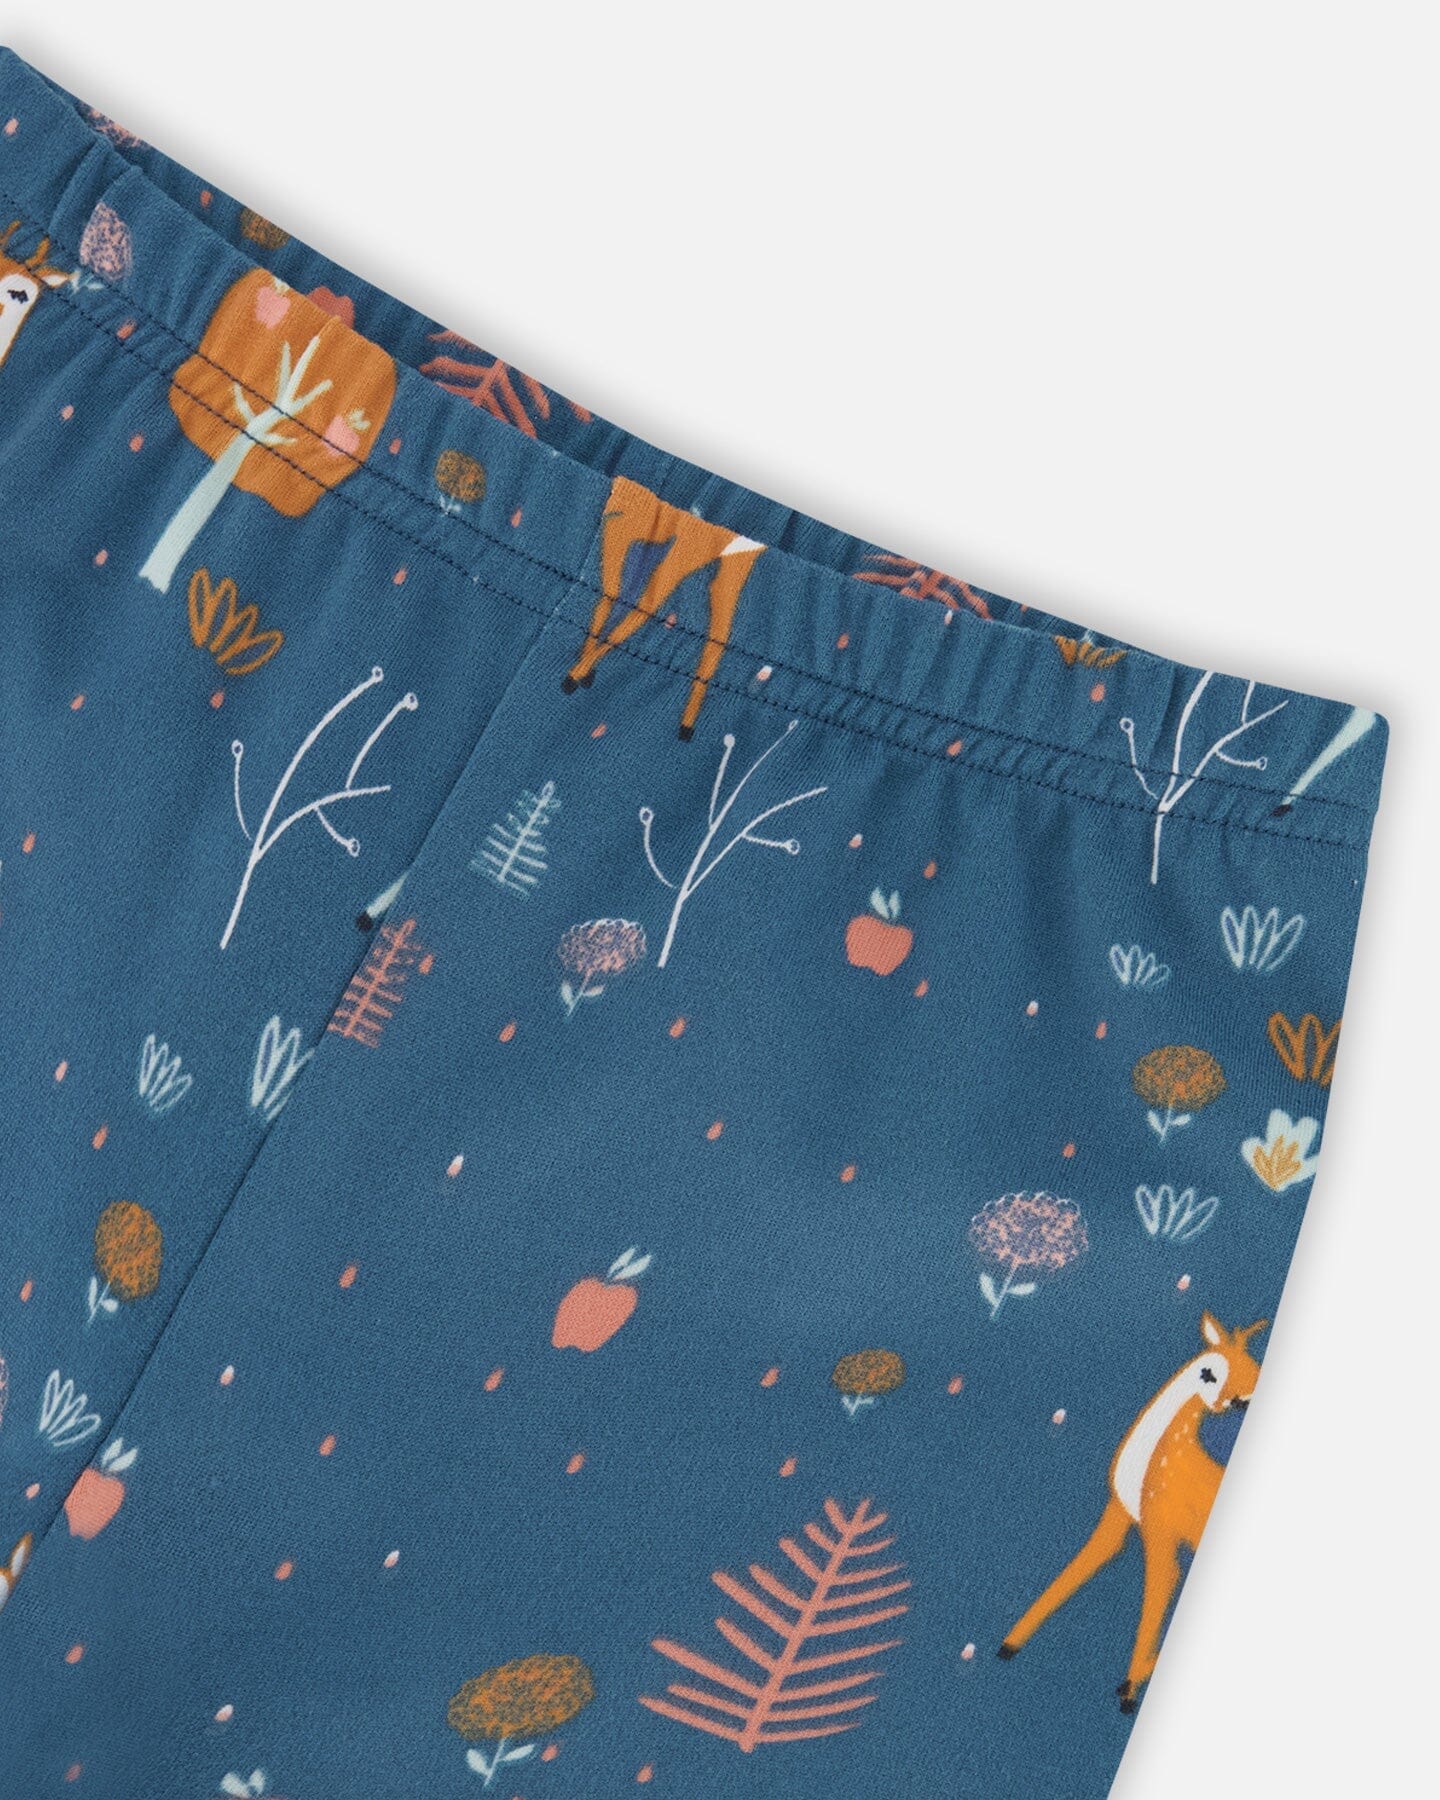 Brushed Jersey Leggings Teal Blue Fawns And Apples Print - F20K60_044